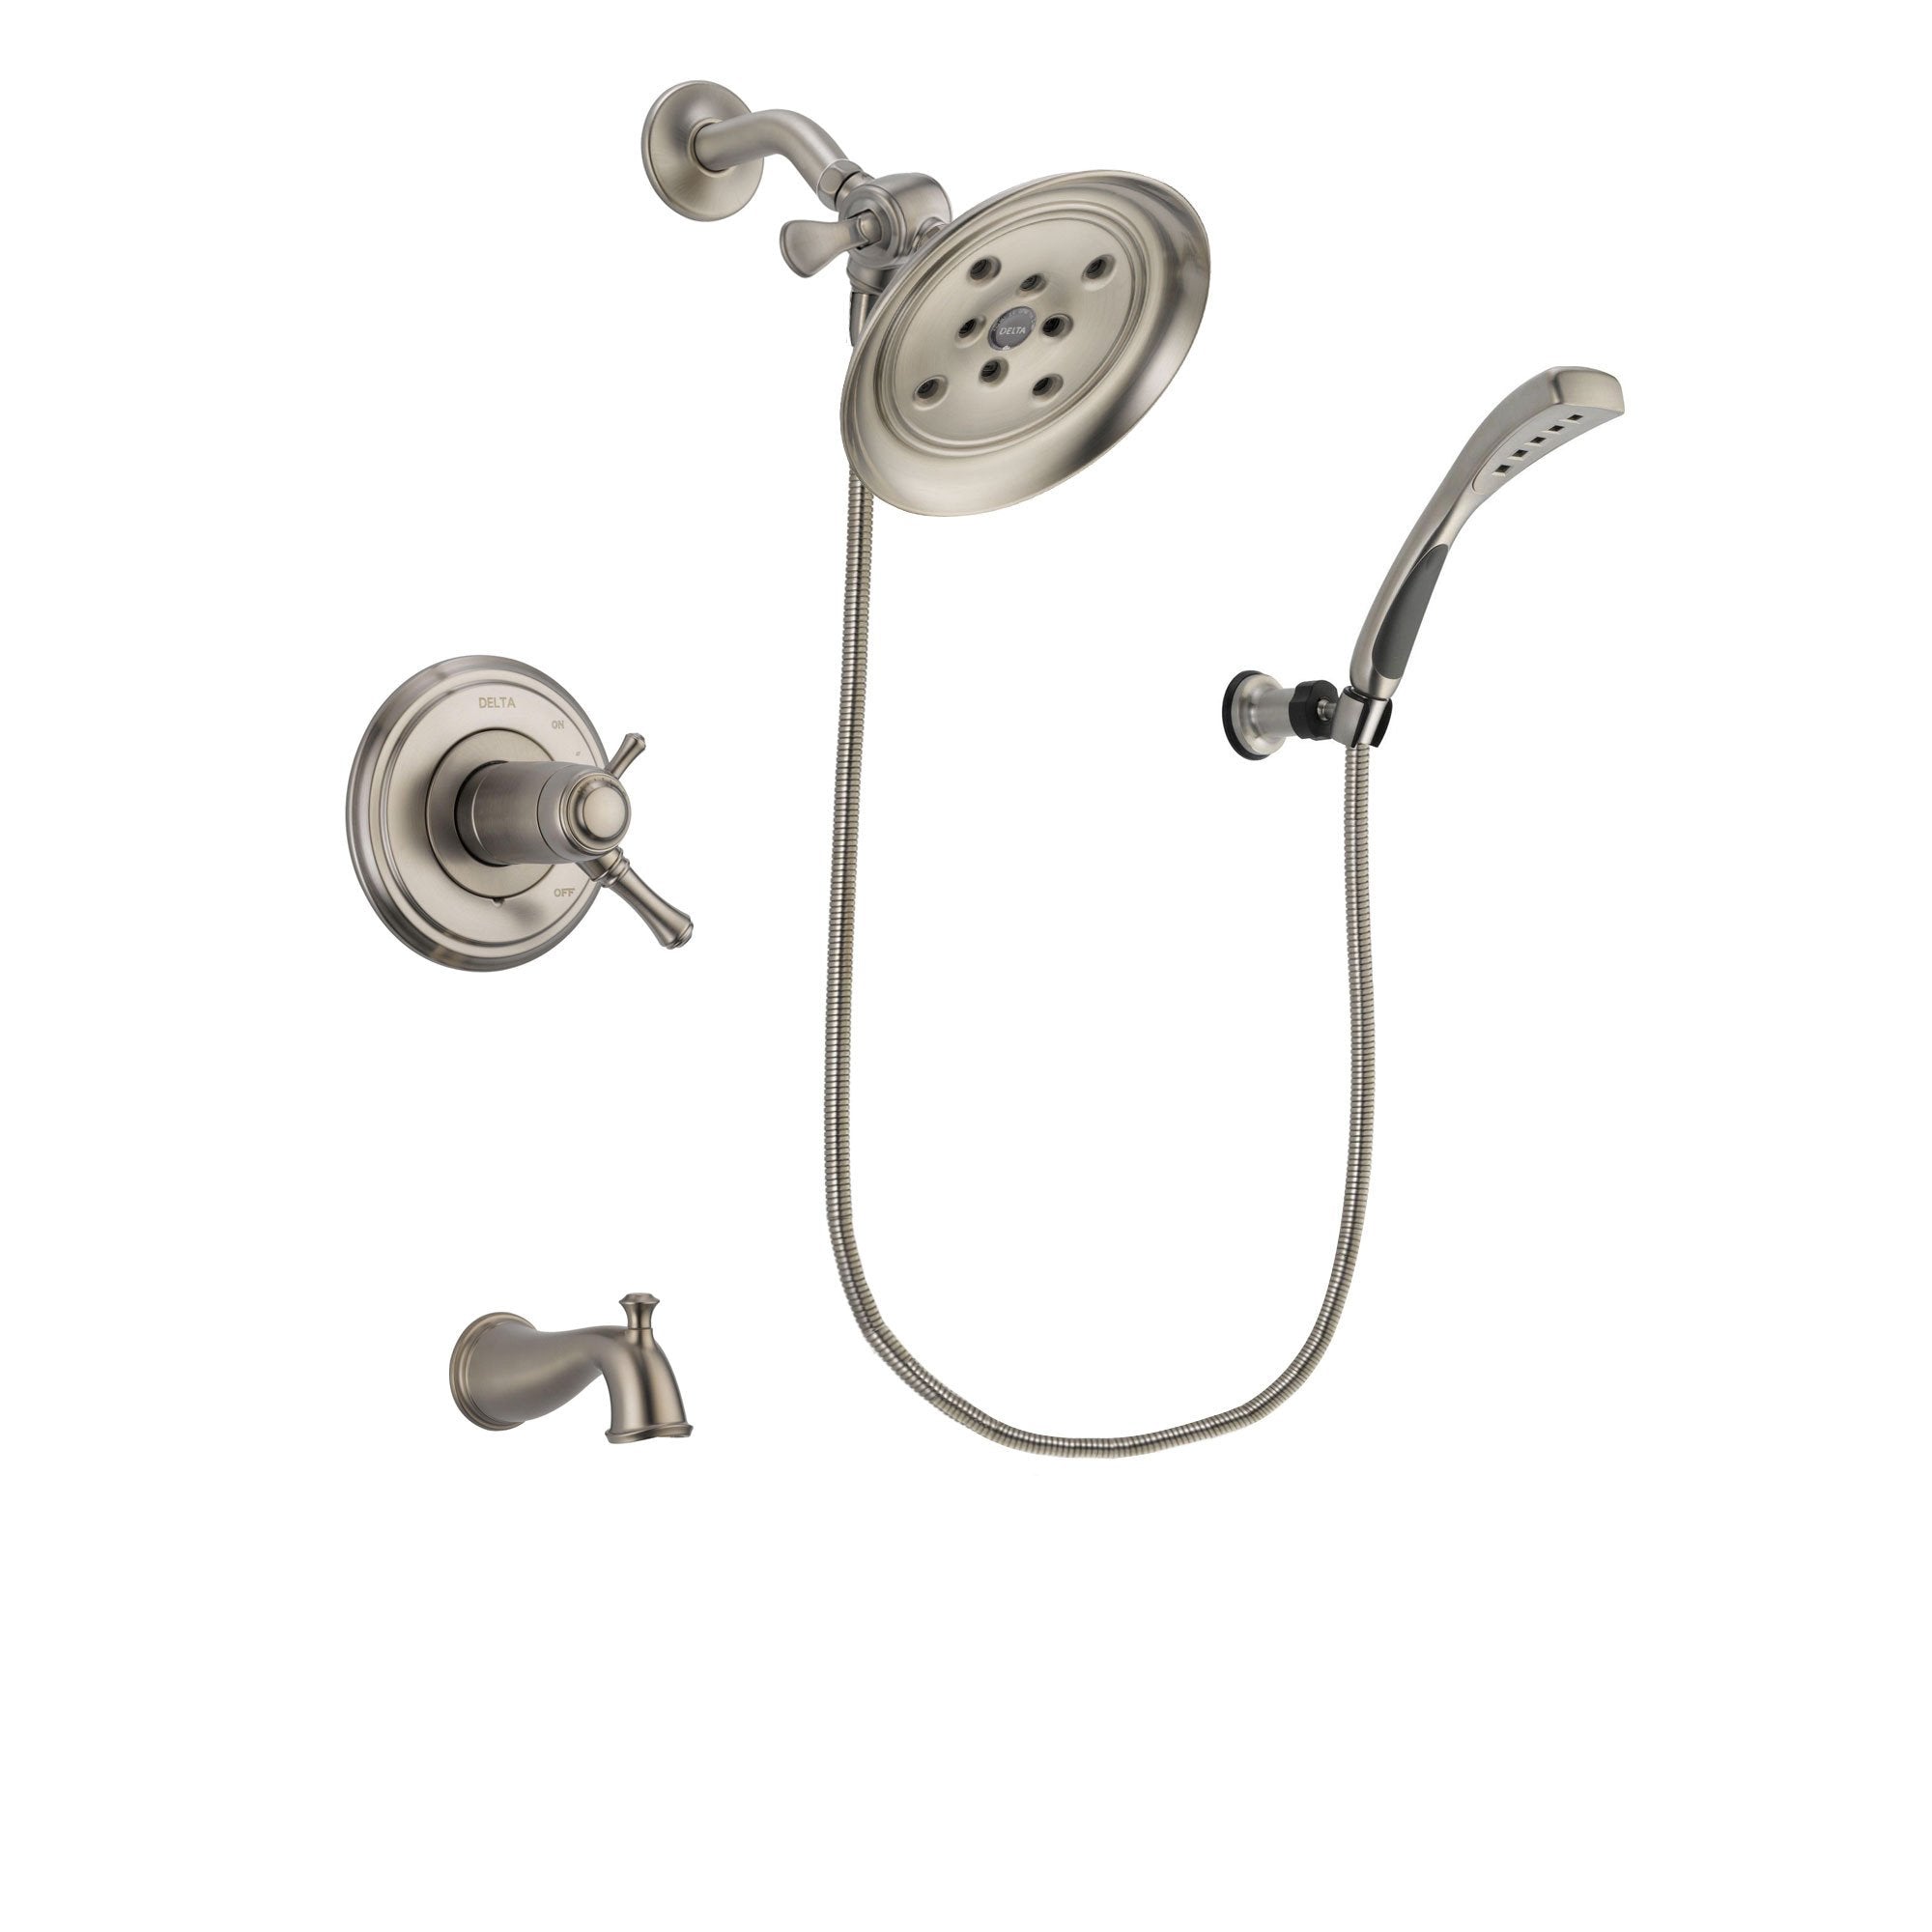 Delta Cassidy Stainless Steel Finish Thermostatic Tub and Shower Faucet System Package with Large Rain Showerhead and Wall Mounted Handshower Includes Rough-in Valve and Tub Spout DSP1861V